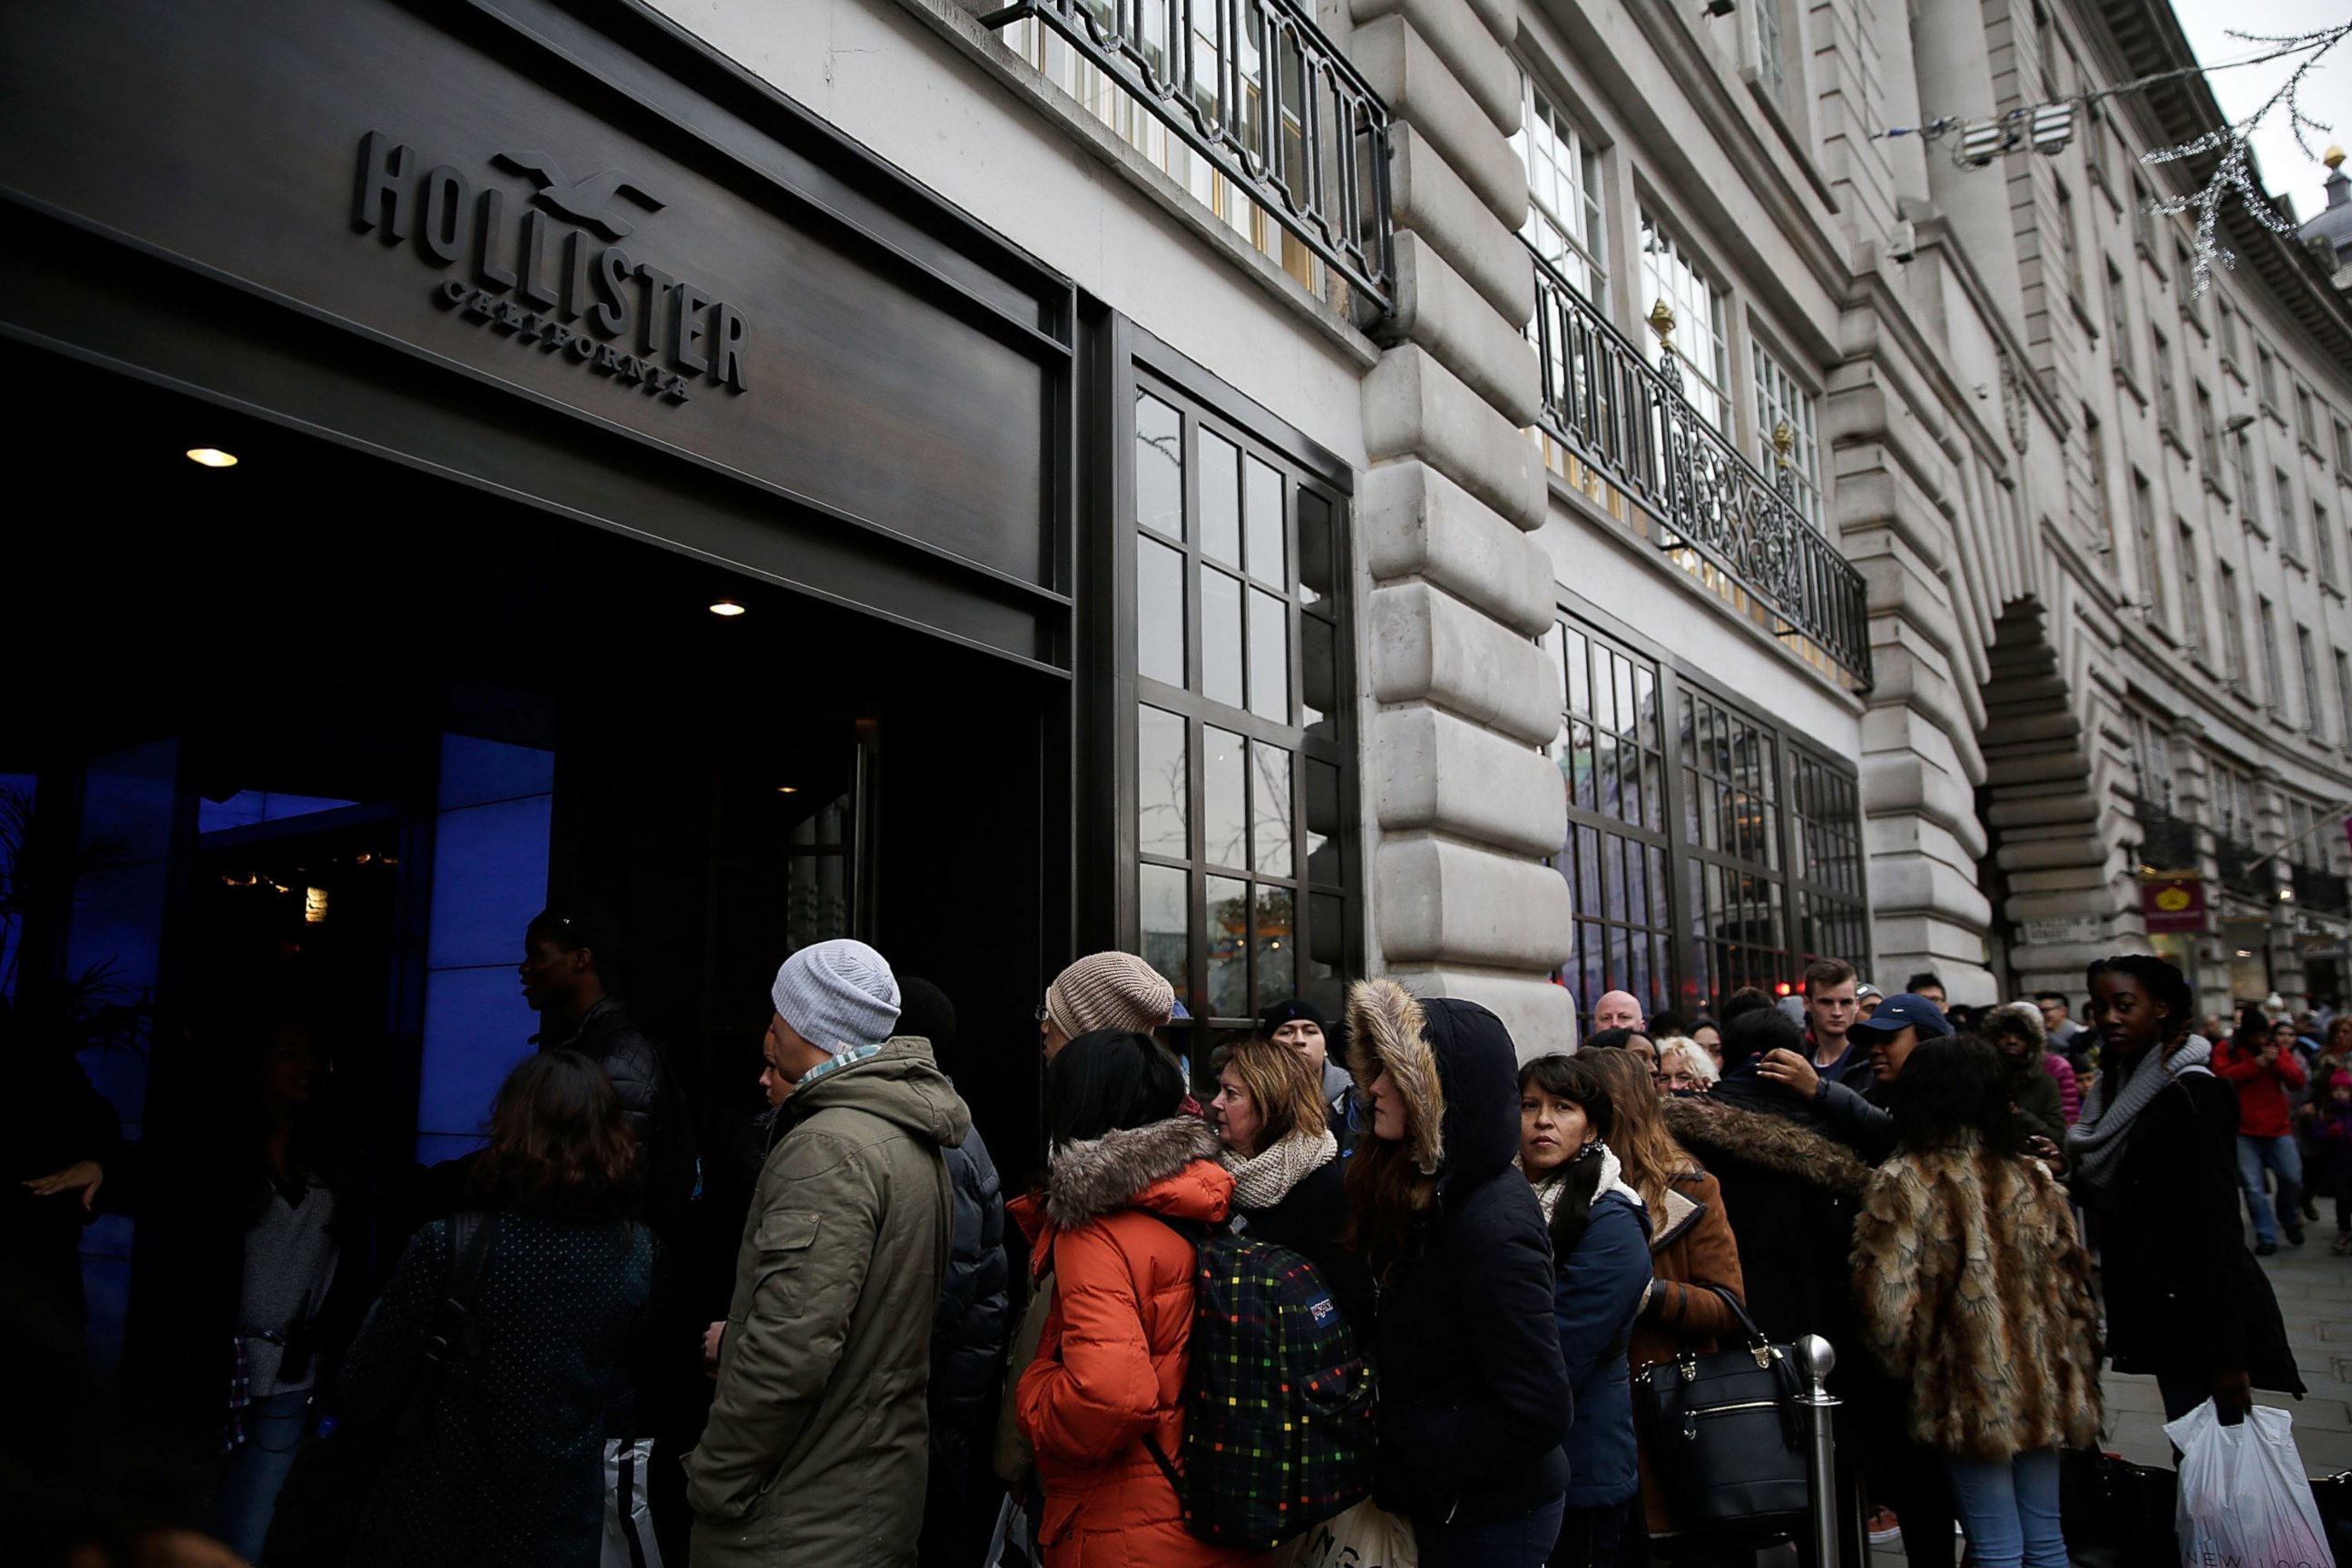 PHOTO: Shoppers queue to enter the Hollister retail store on Regent Street during the Boxing Day sales on Dec. 26, 2013 in London. 